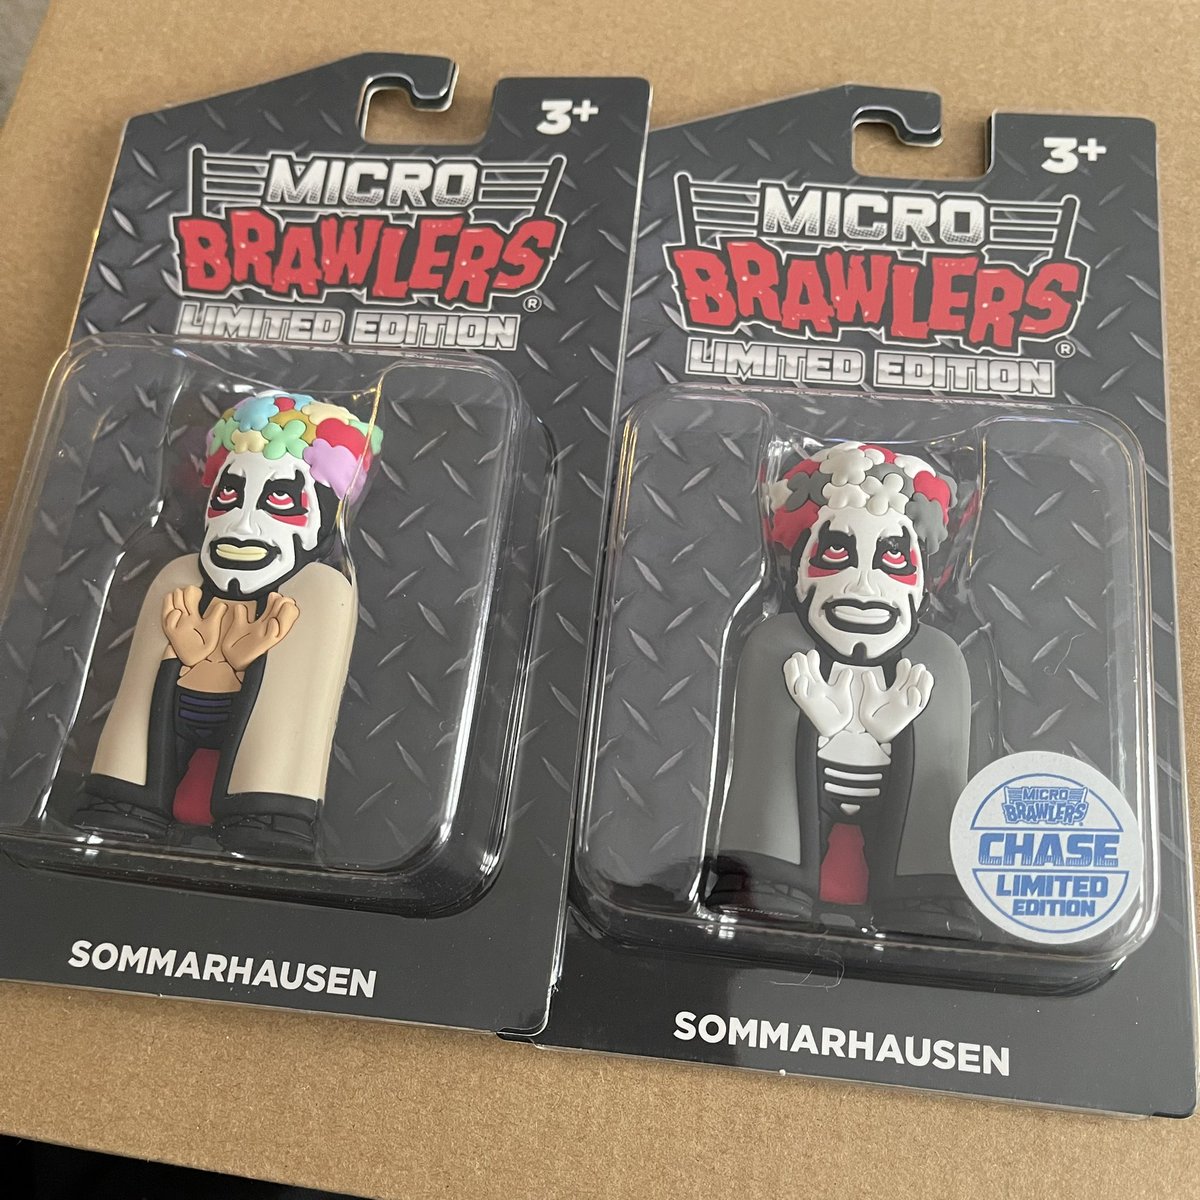 When you order 2 @DanhausenAD micro brawlers so you can open one, but @PWTees sends you a chase. Guess their both staying sealed. #VeryNiceVeryEvil